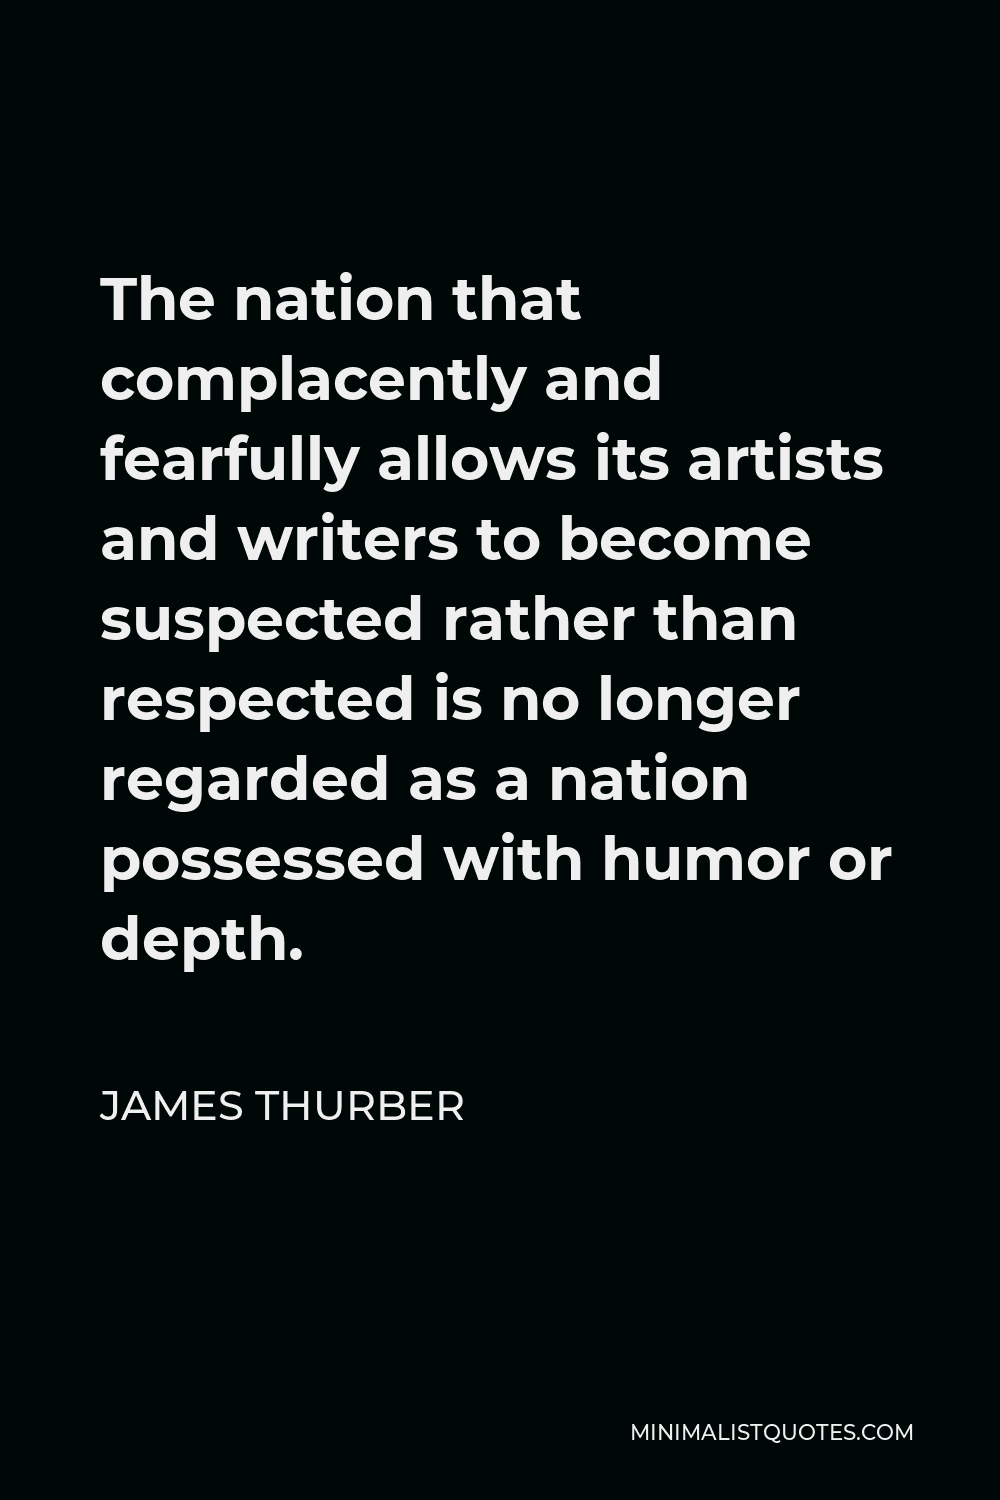 James Thurber Quote - The nation that complacently and fearfully allows its artists and writers to become suspected rather than respected is no longer regarded as a nation possessed with humor or depth.